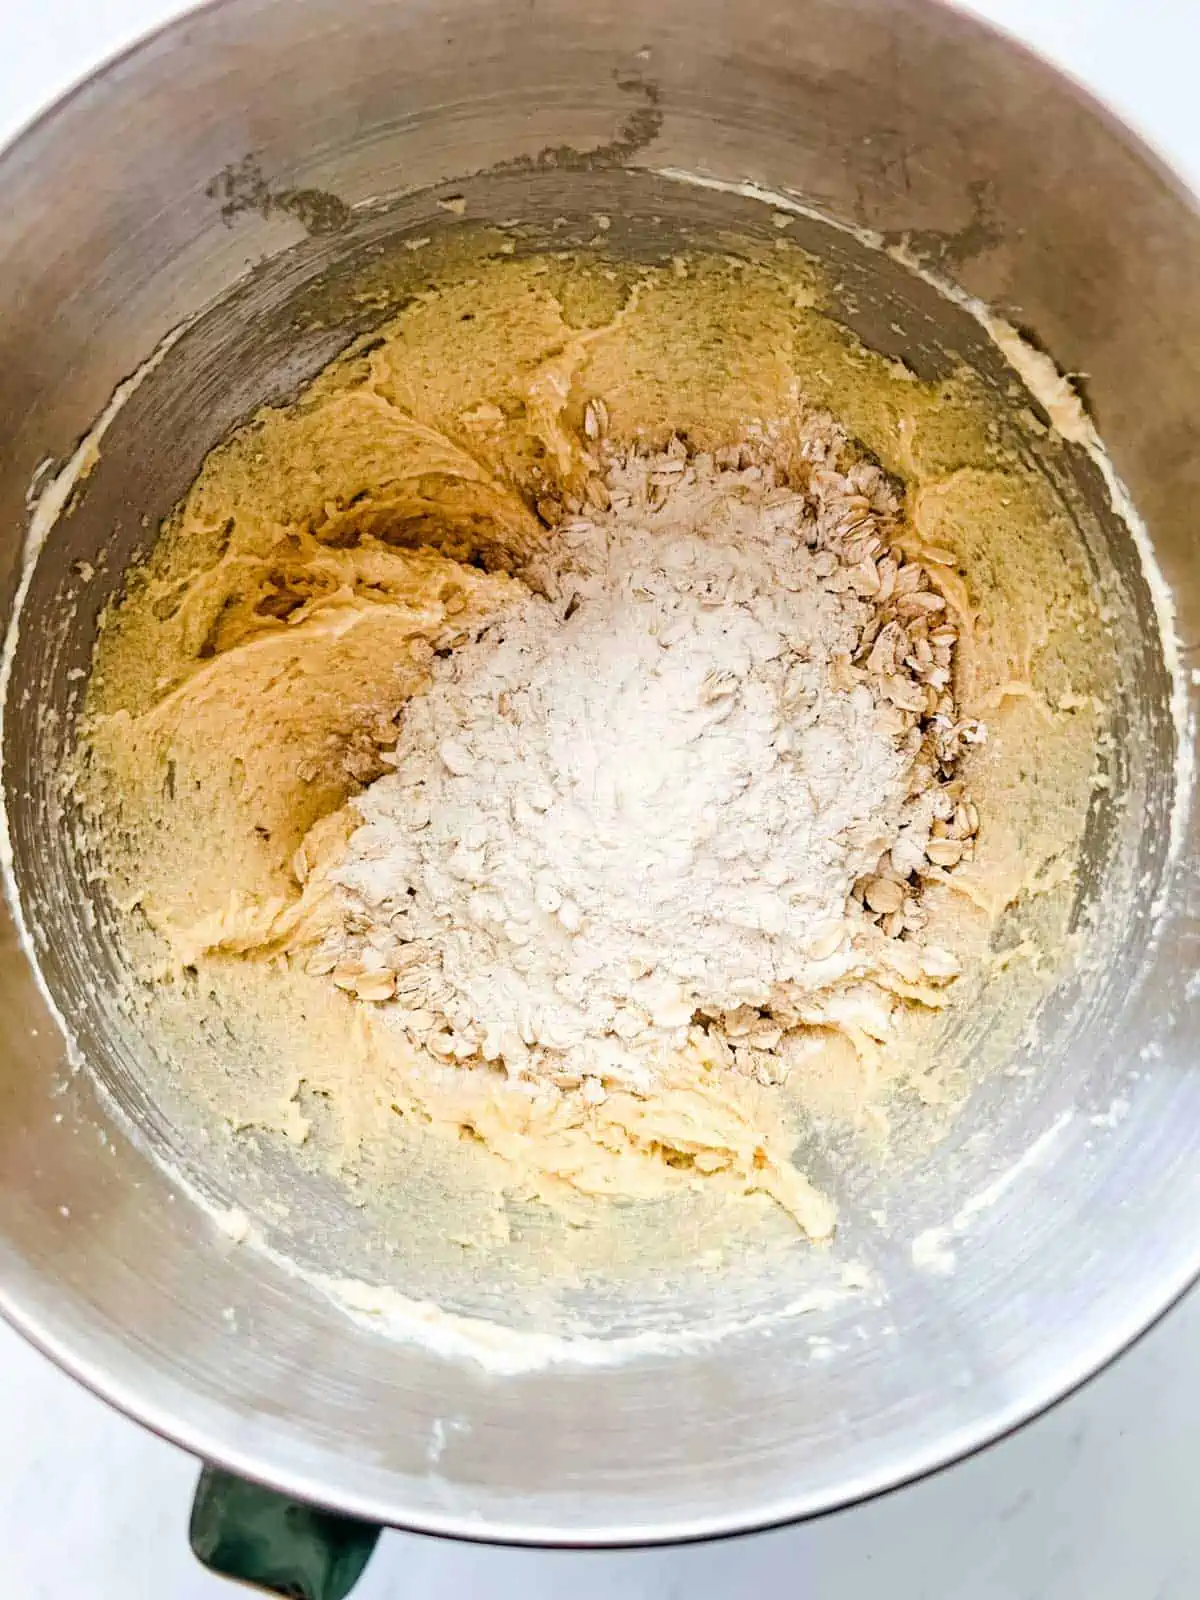 Photo of the creamed butter mixture for cookies that have just had the flour mixture added to them.